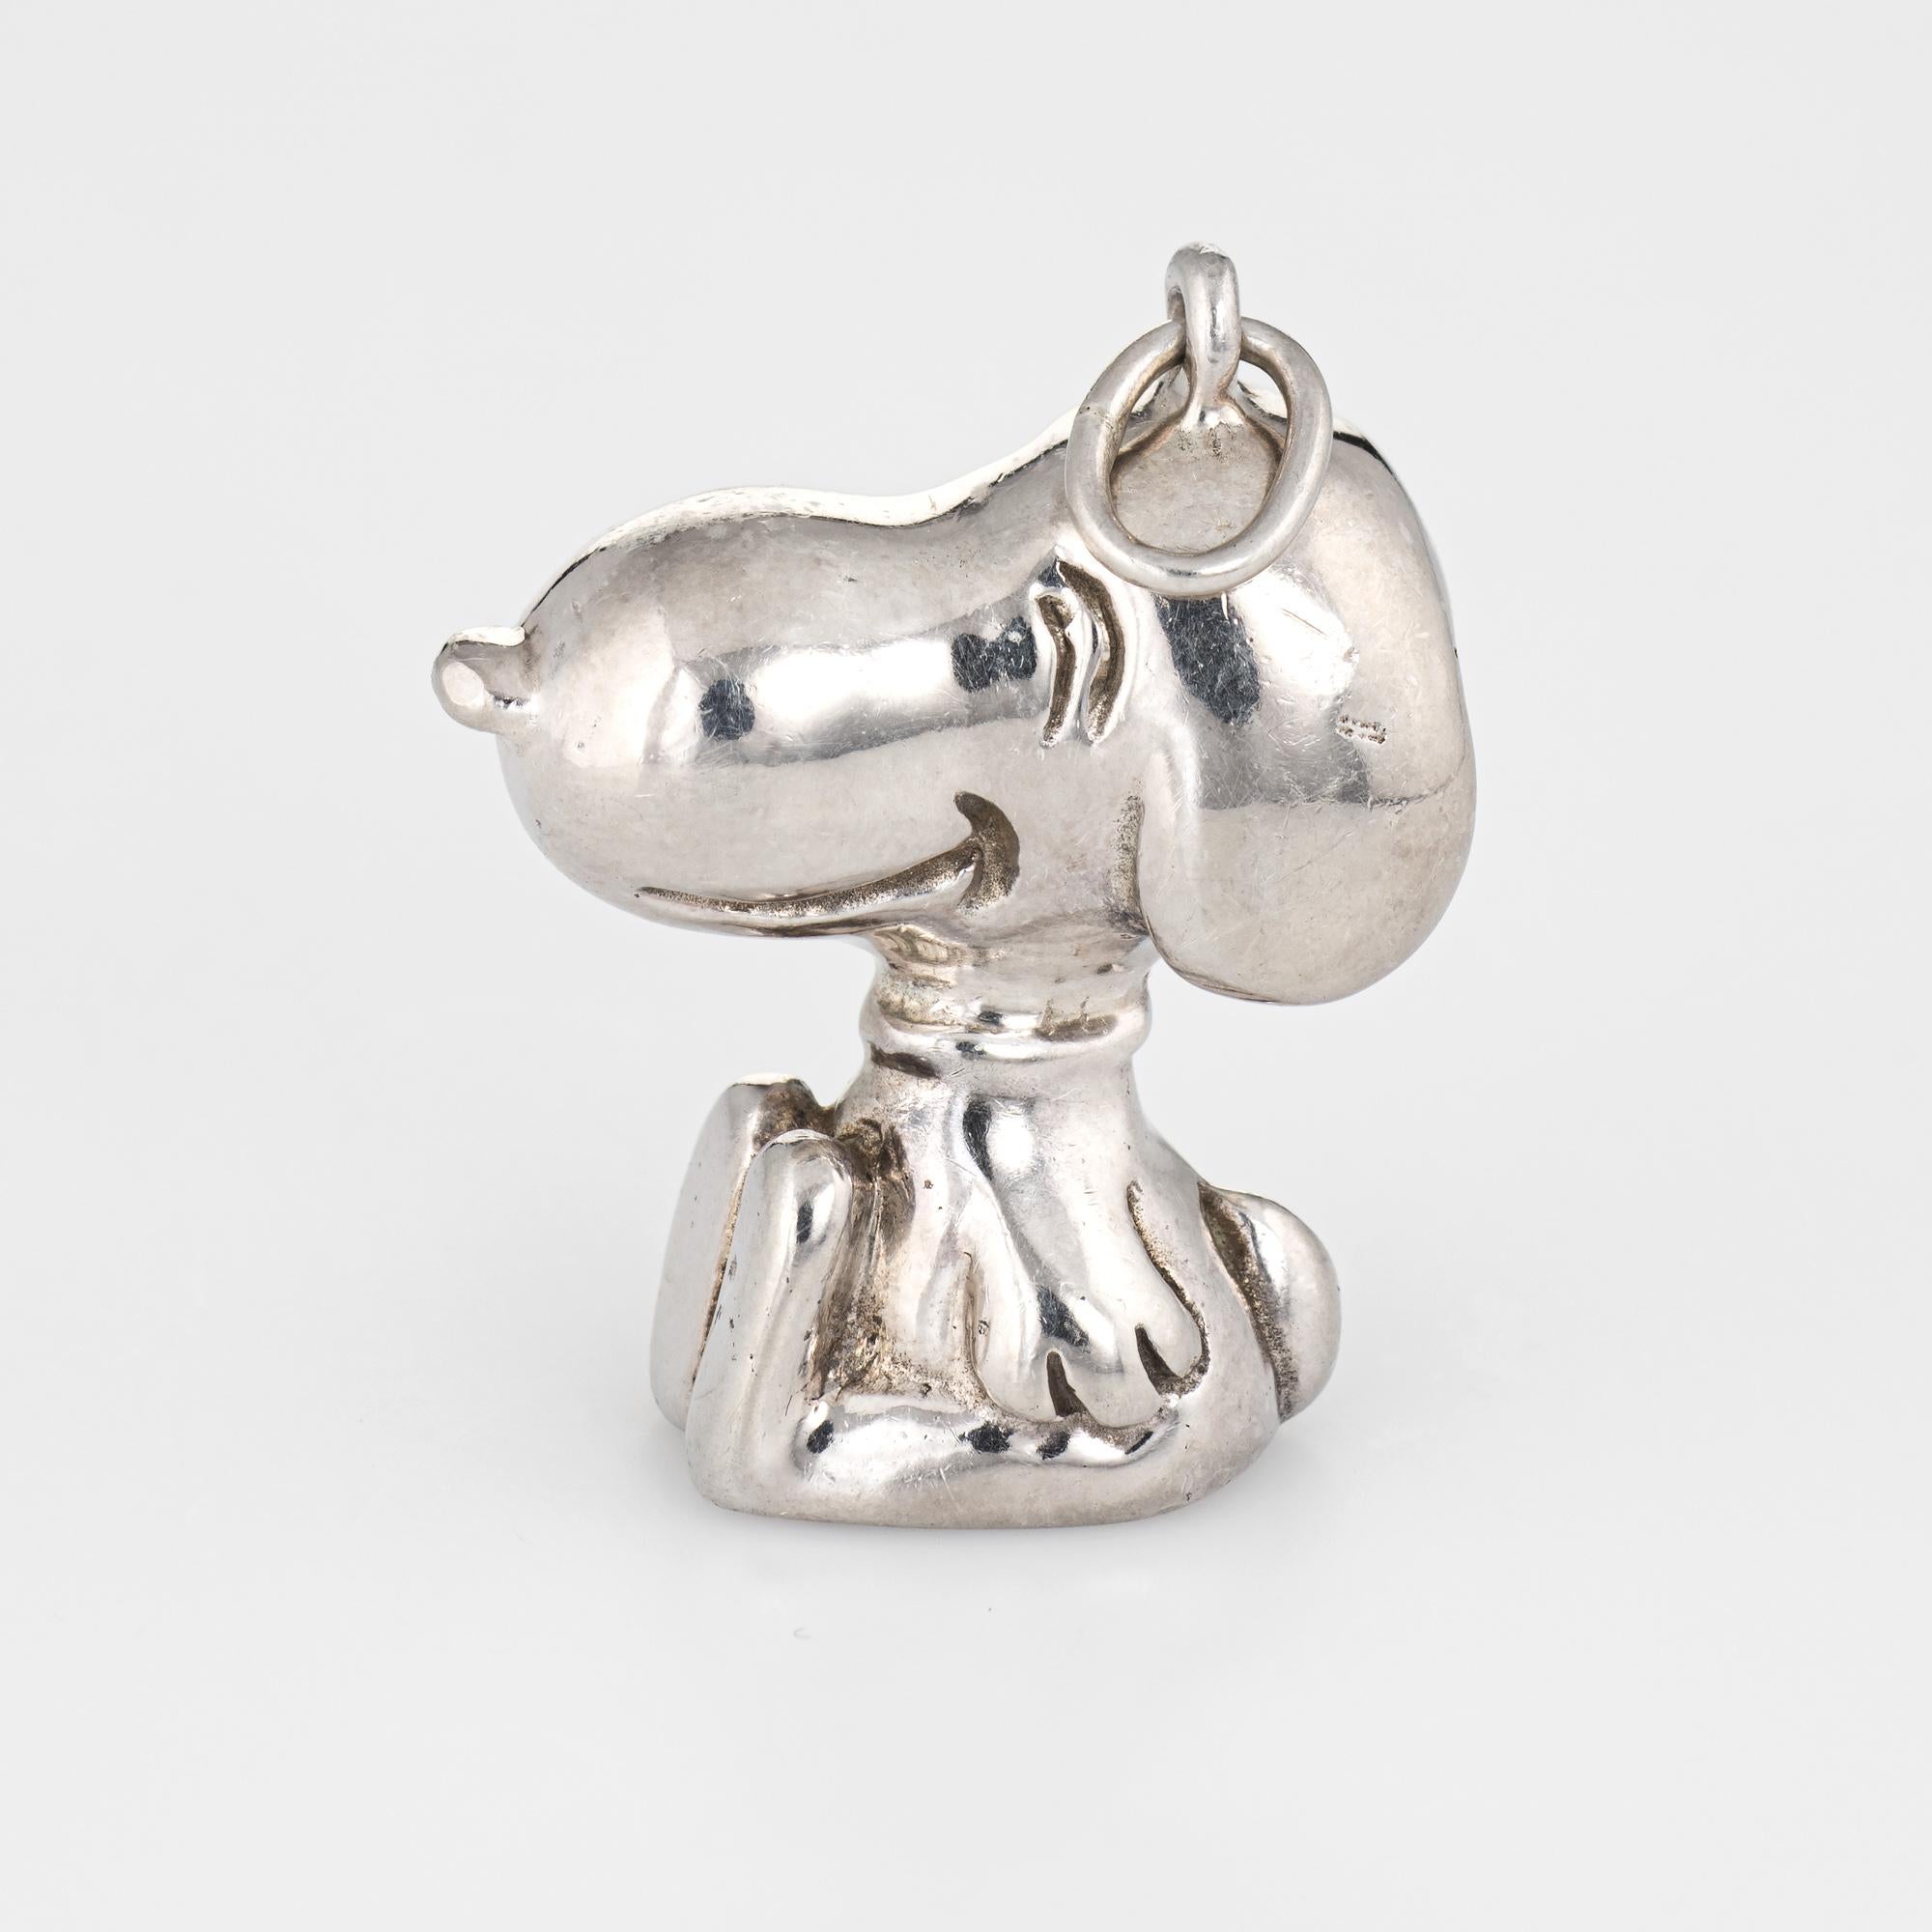 Finely detailed vintage Cartier Snoopy charm crafted in sterling silver.  

The charm (also wearable as a pendant) is a rare find on the market today. Traditionally Cartier has sold good luck charms. The Snoopy charm was introduced in 1958-66